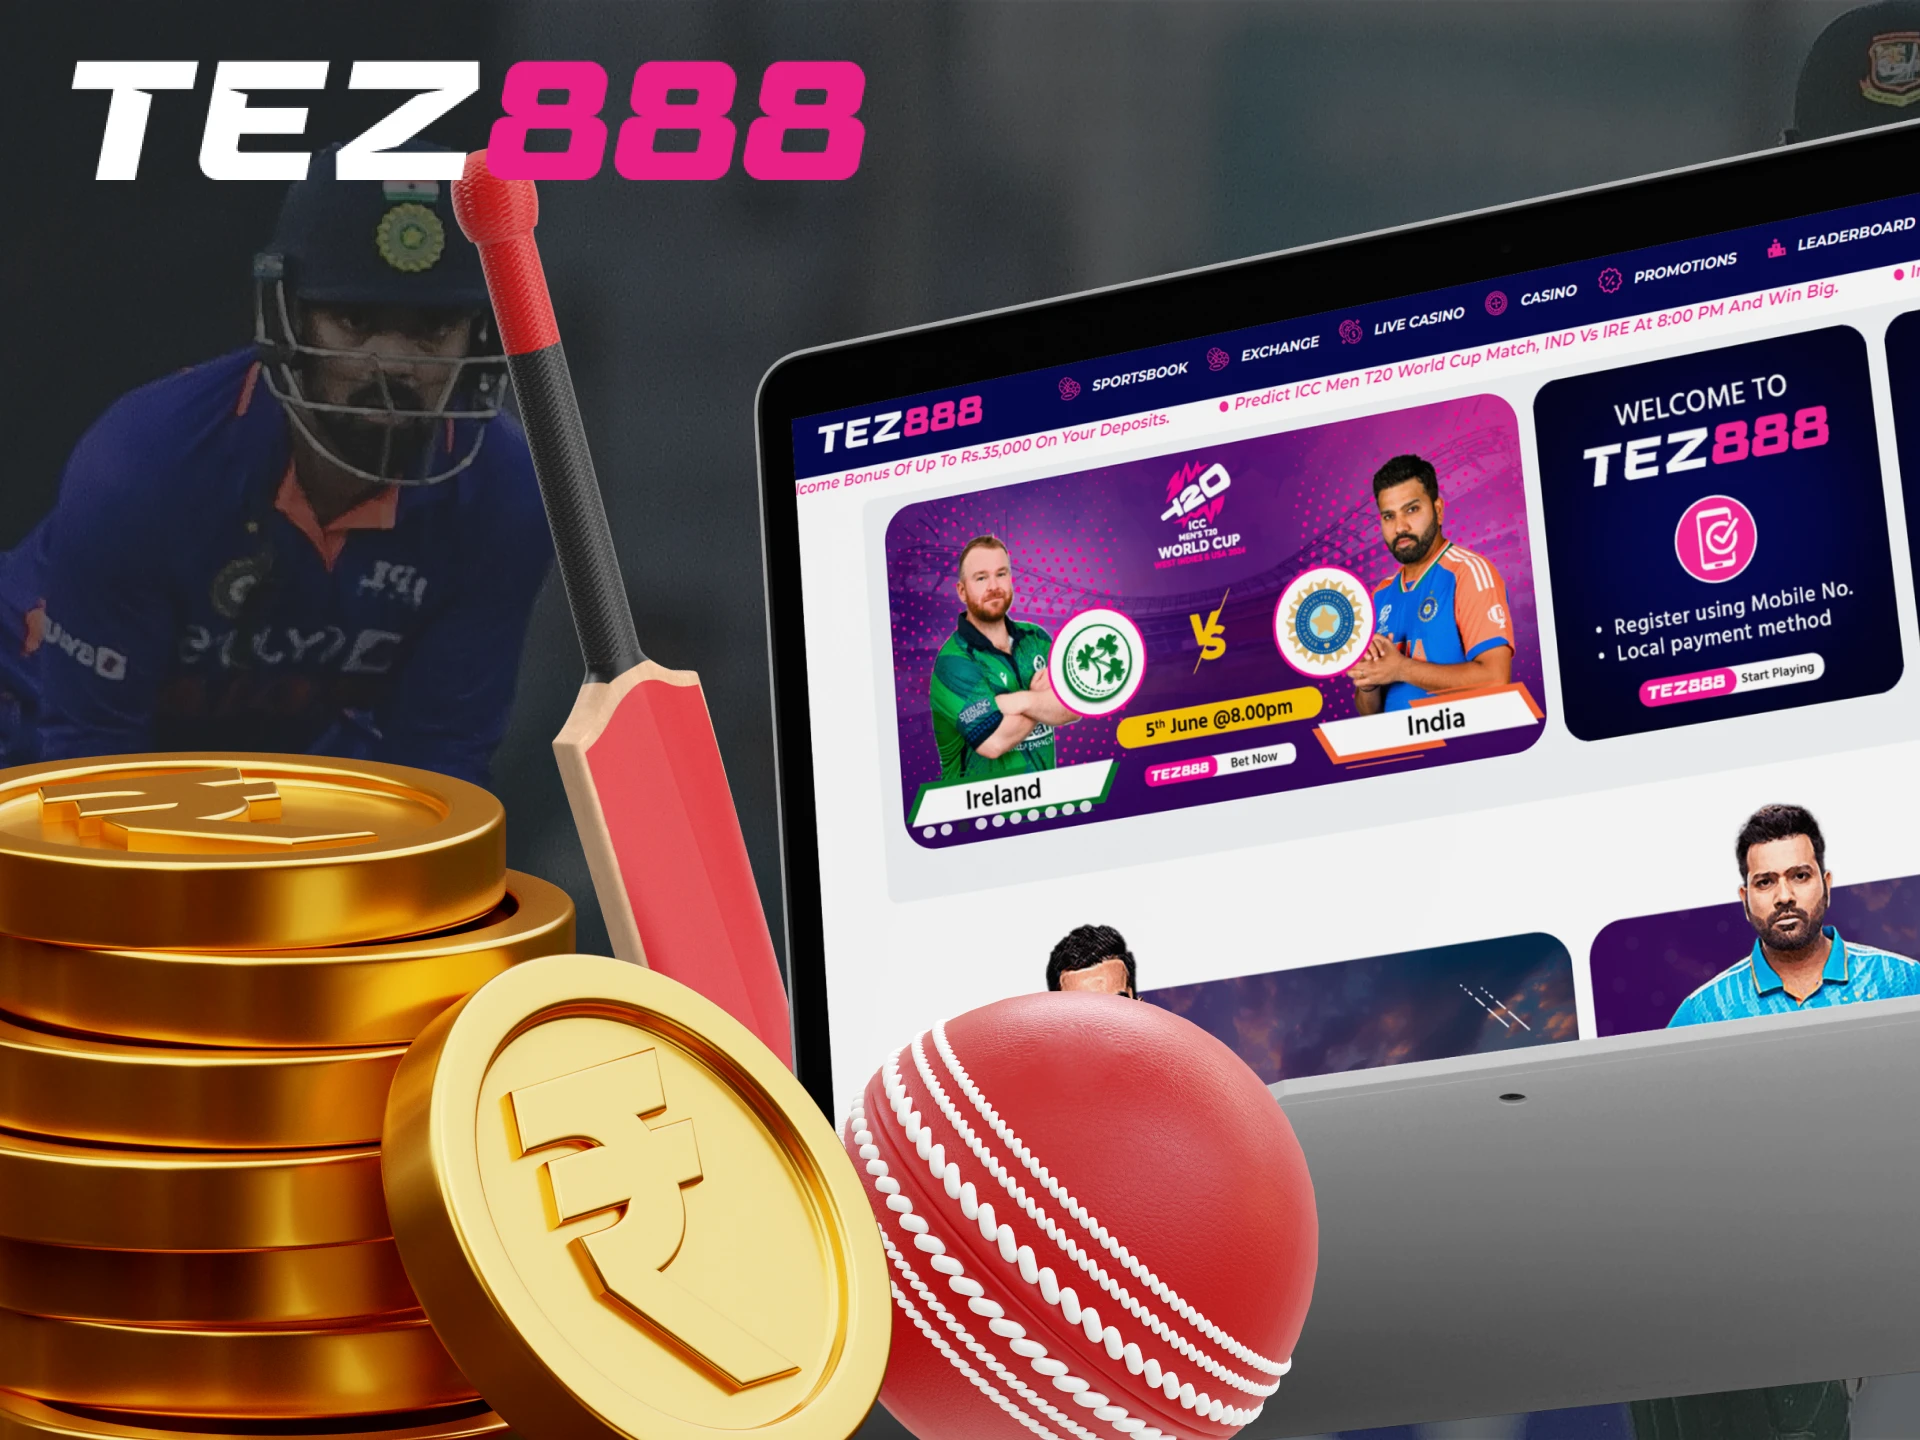 After registering with Tez888, you can start exploring its large sports section.